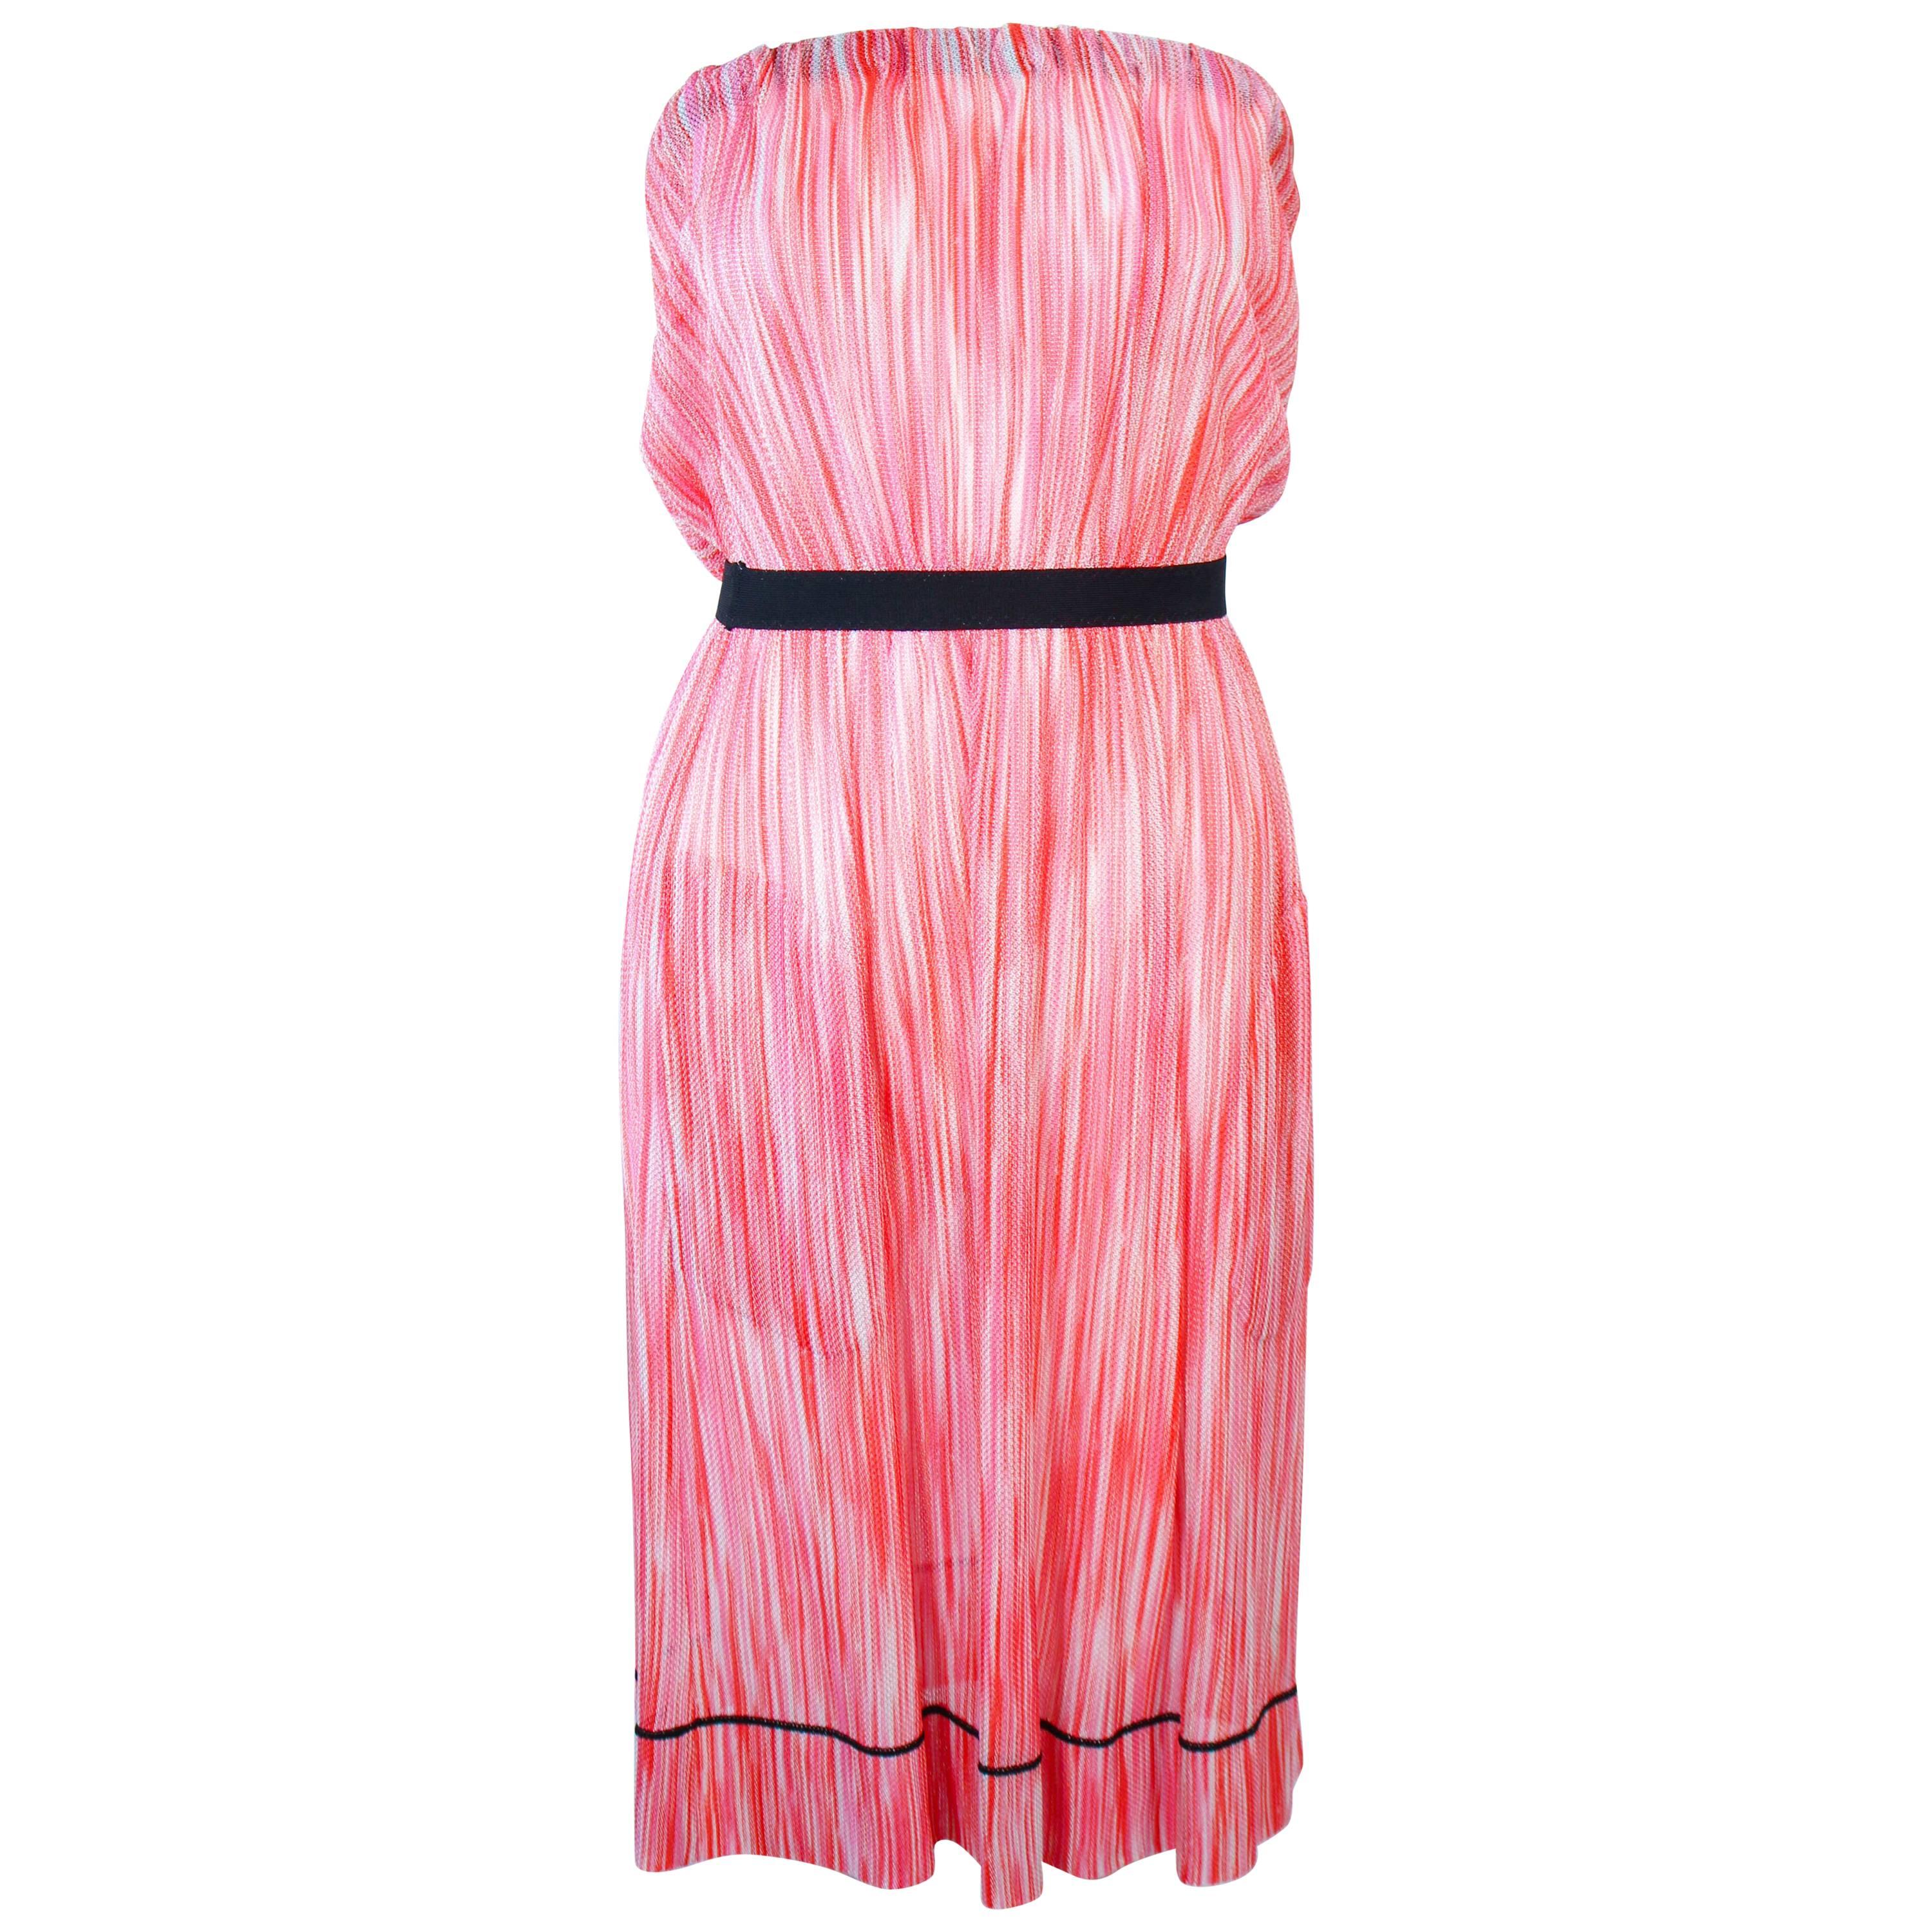 MISSONI White Orange and Pink Knit Strapless Dress Size 4 6 For Sale